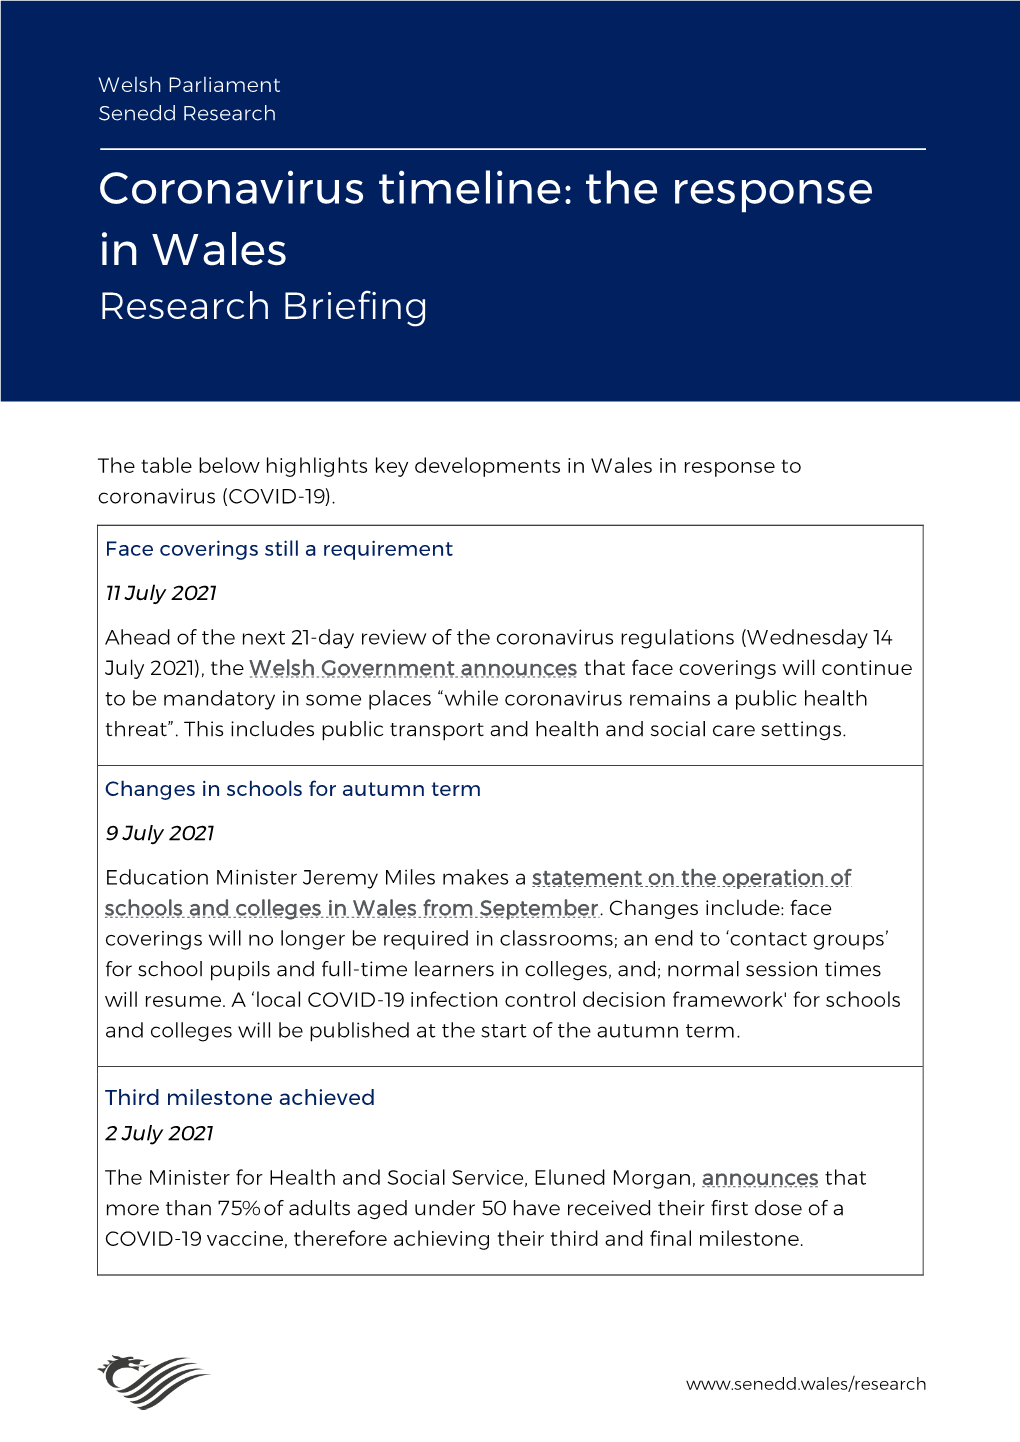 Coronavirus Timeline: the Response in Wales Research Briefing